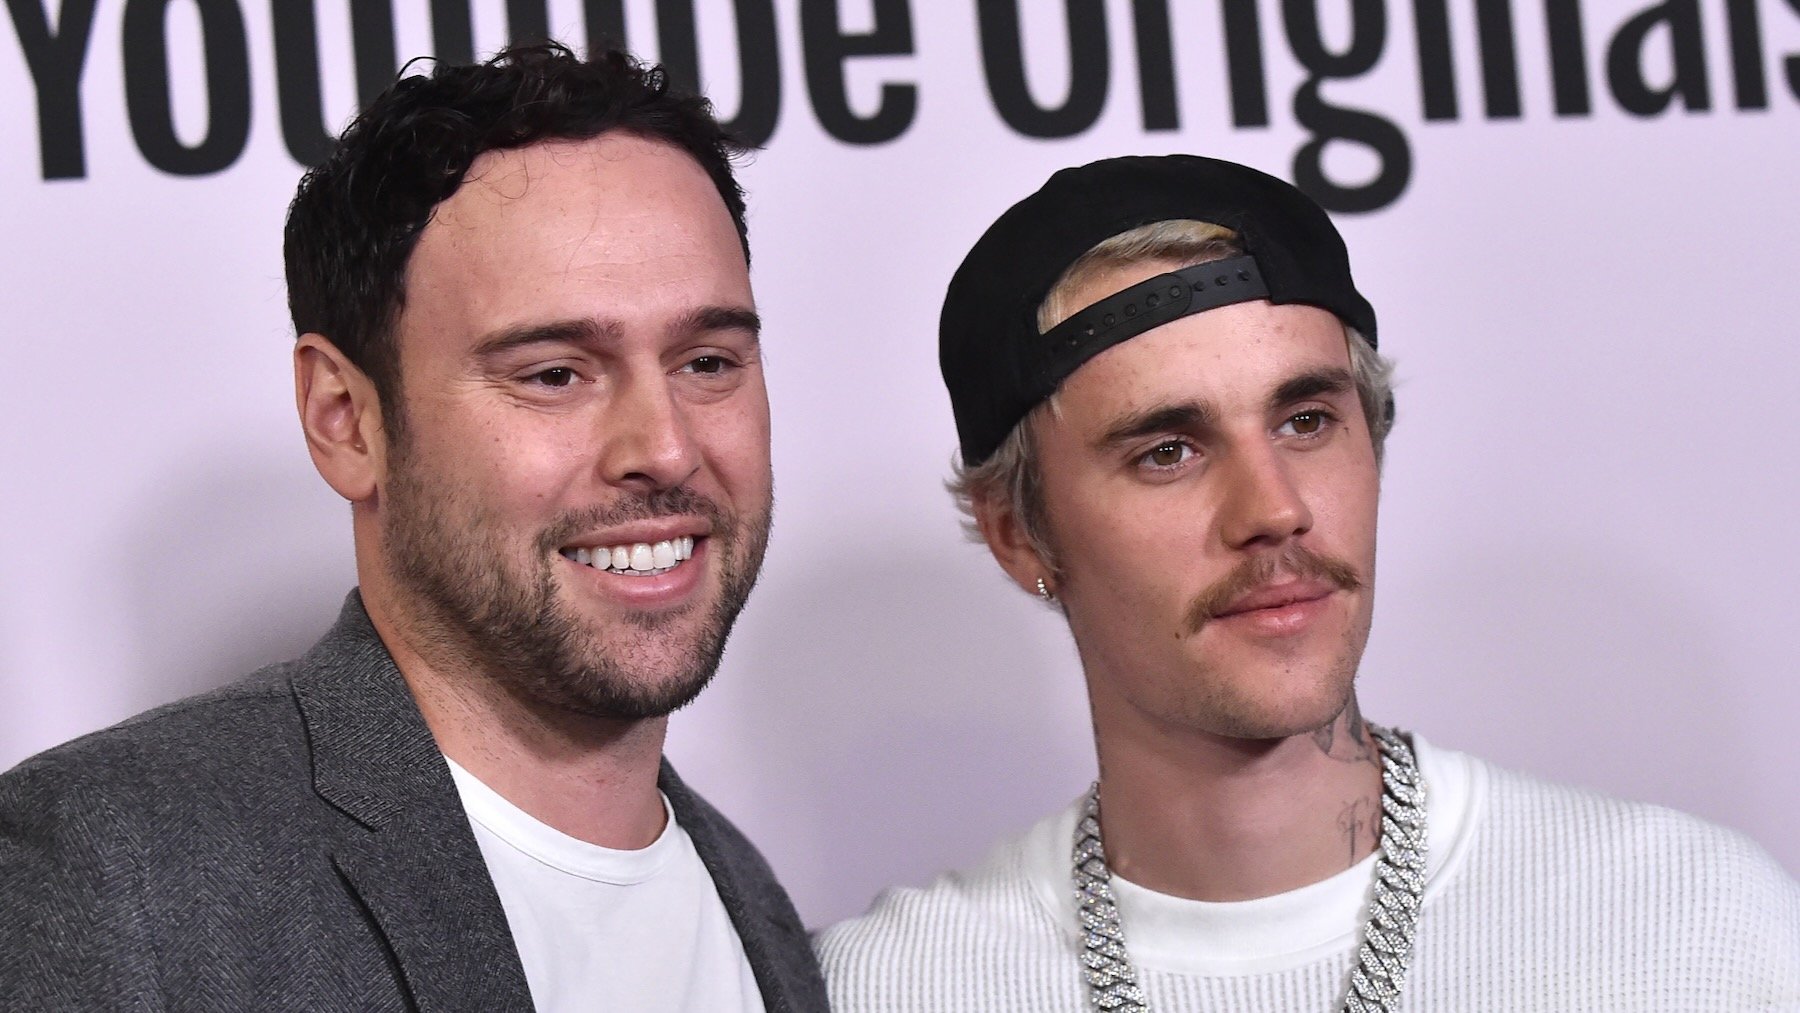 Justin Bieber Officially Leaves Scooter Braun - Hailey Bieber Led The Change